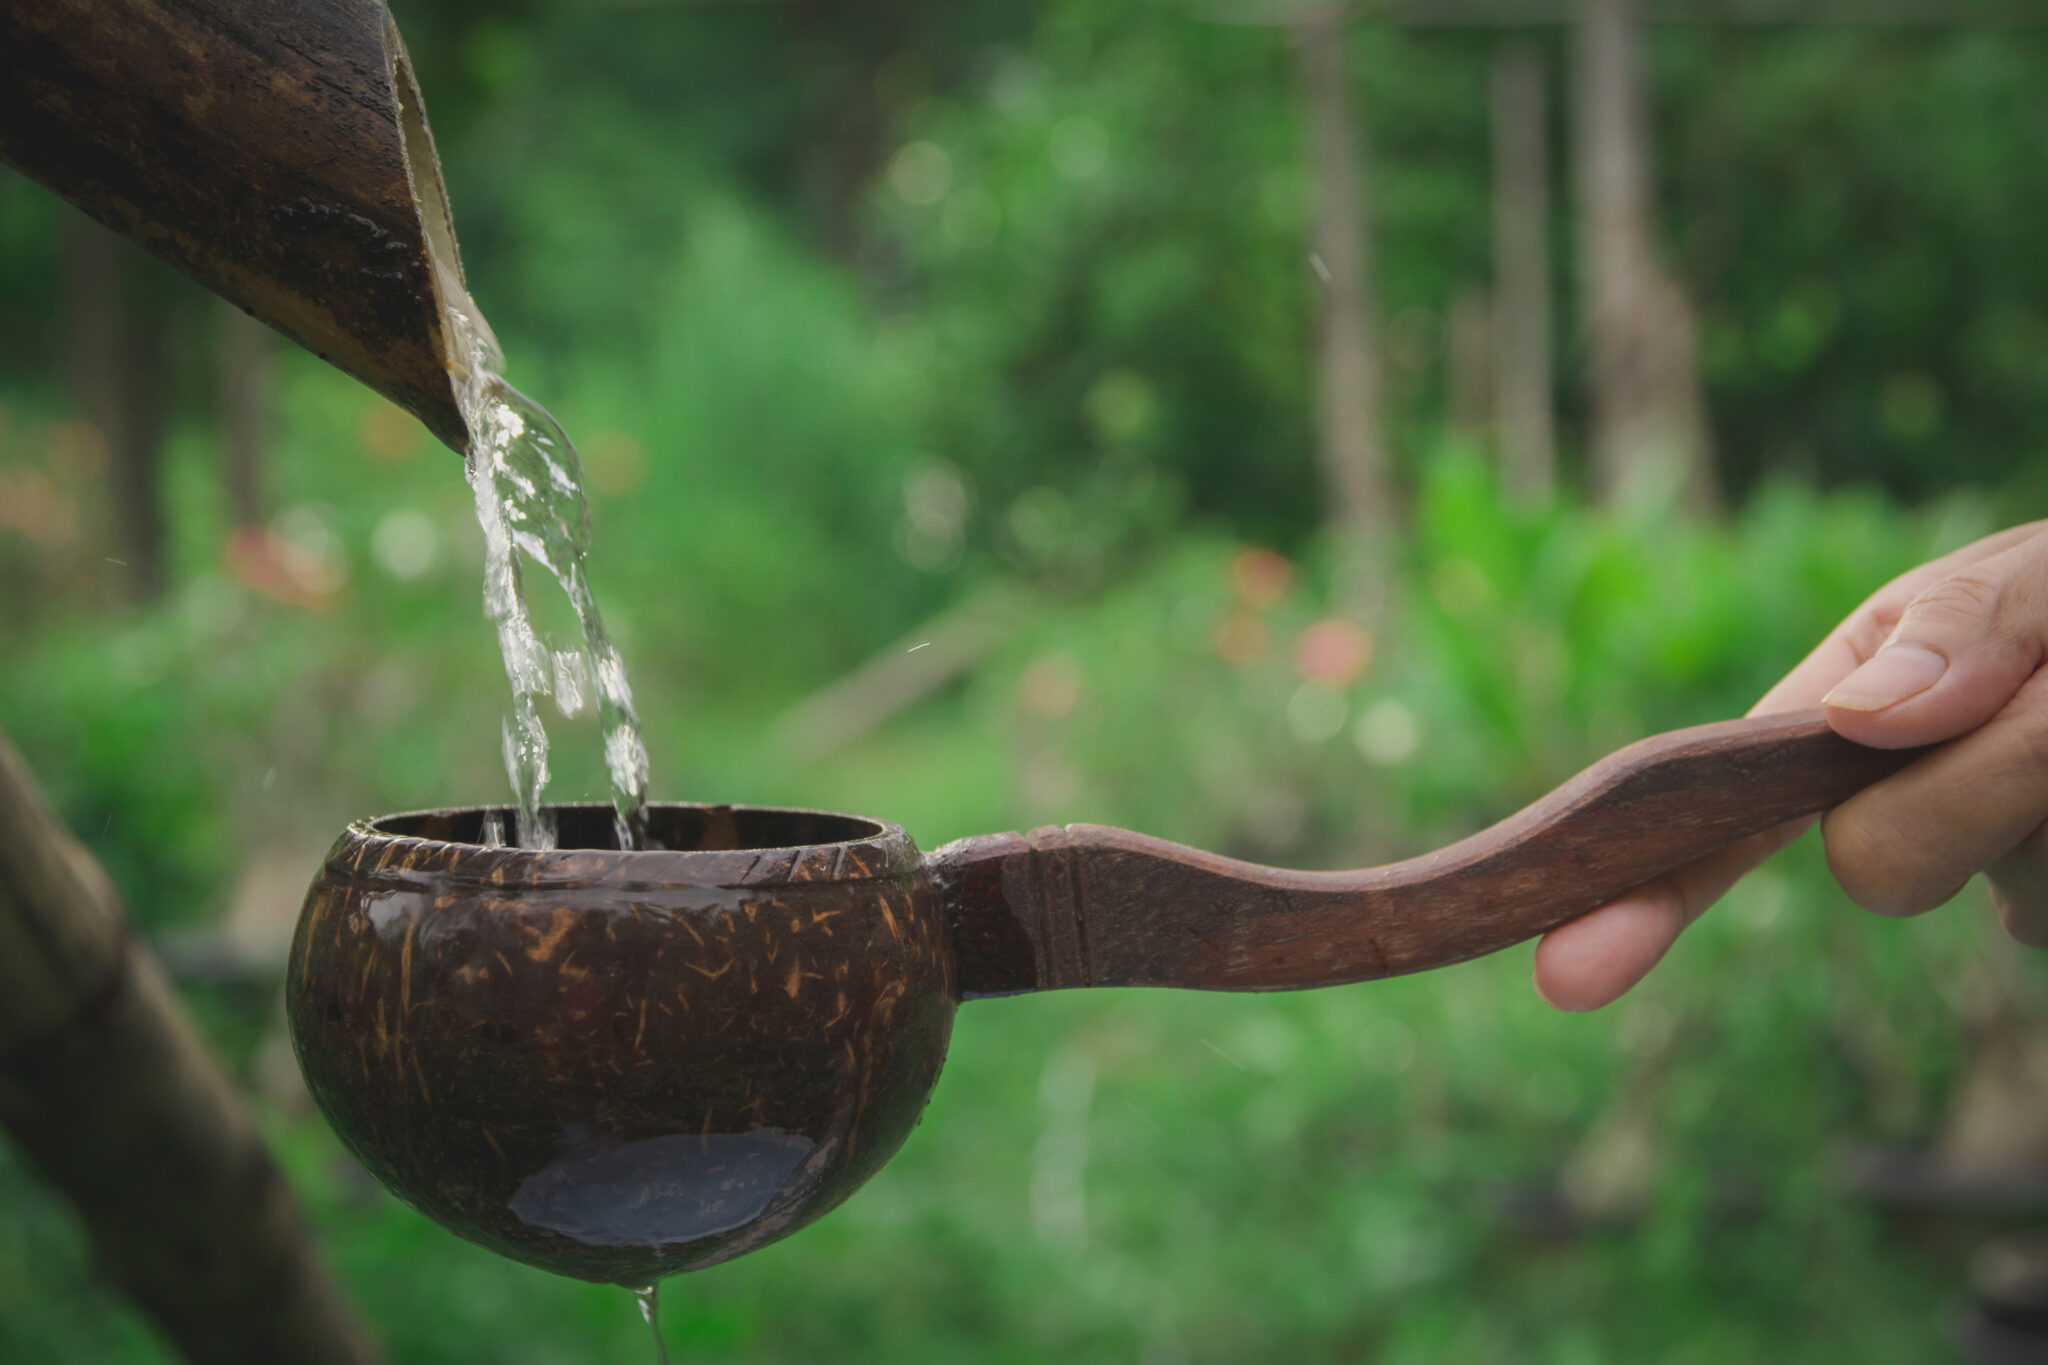 Water pouring in coconut shell and hand holding the water bowl m